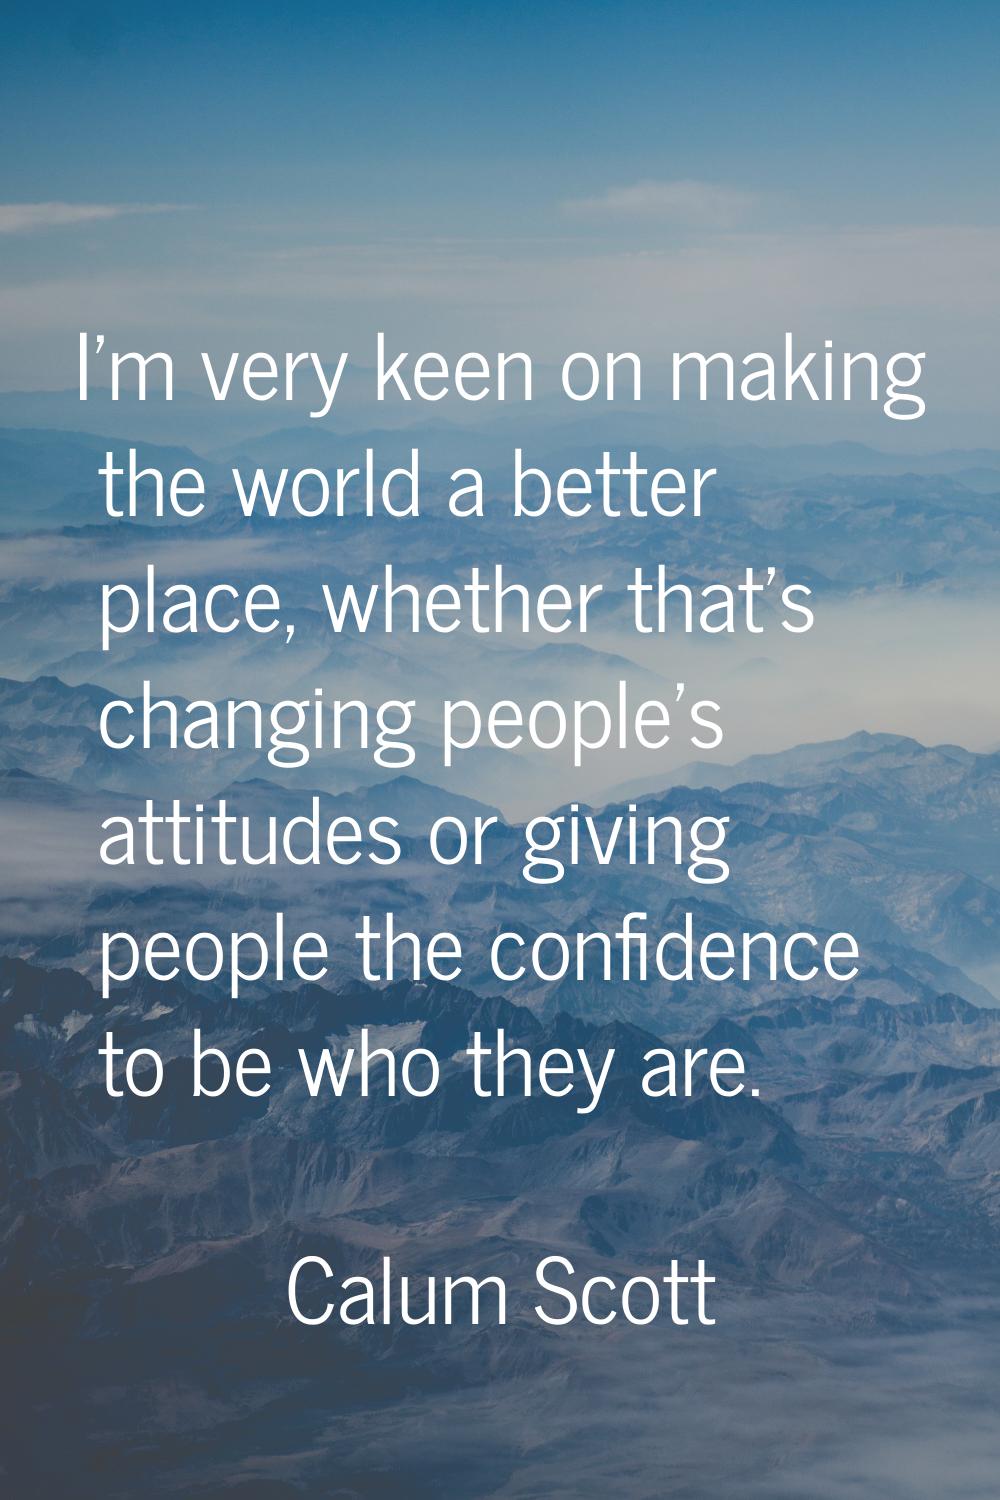 I'm very keen on making the world a better place, whether that's changing people's attitudes or giv